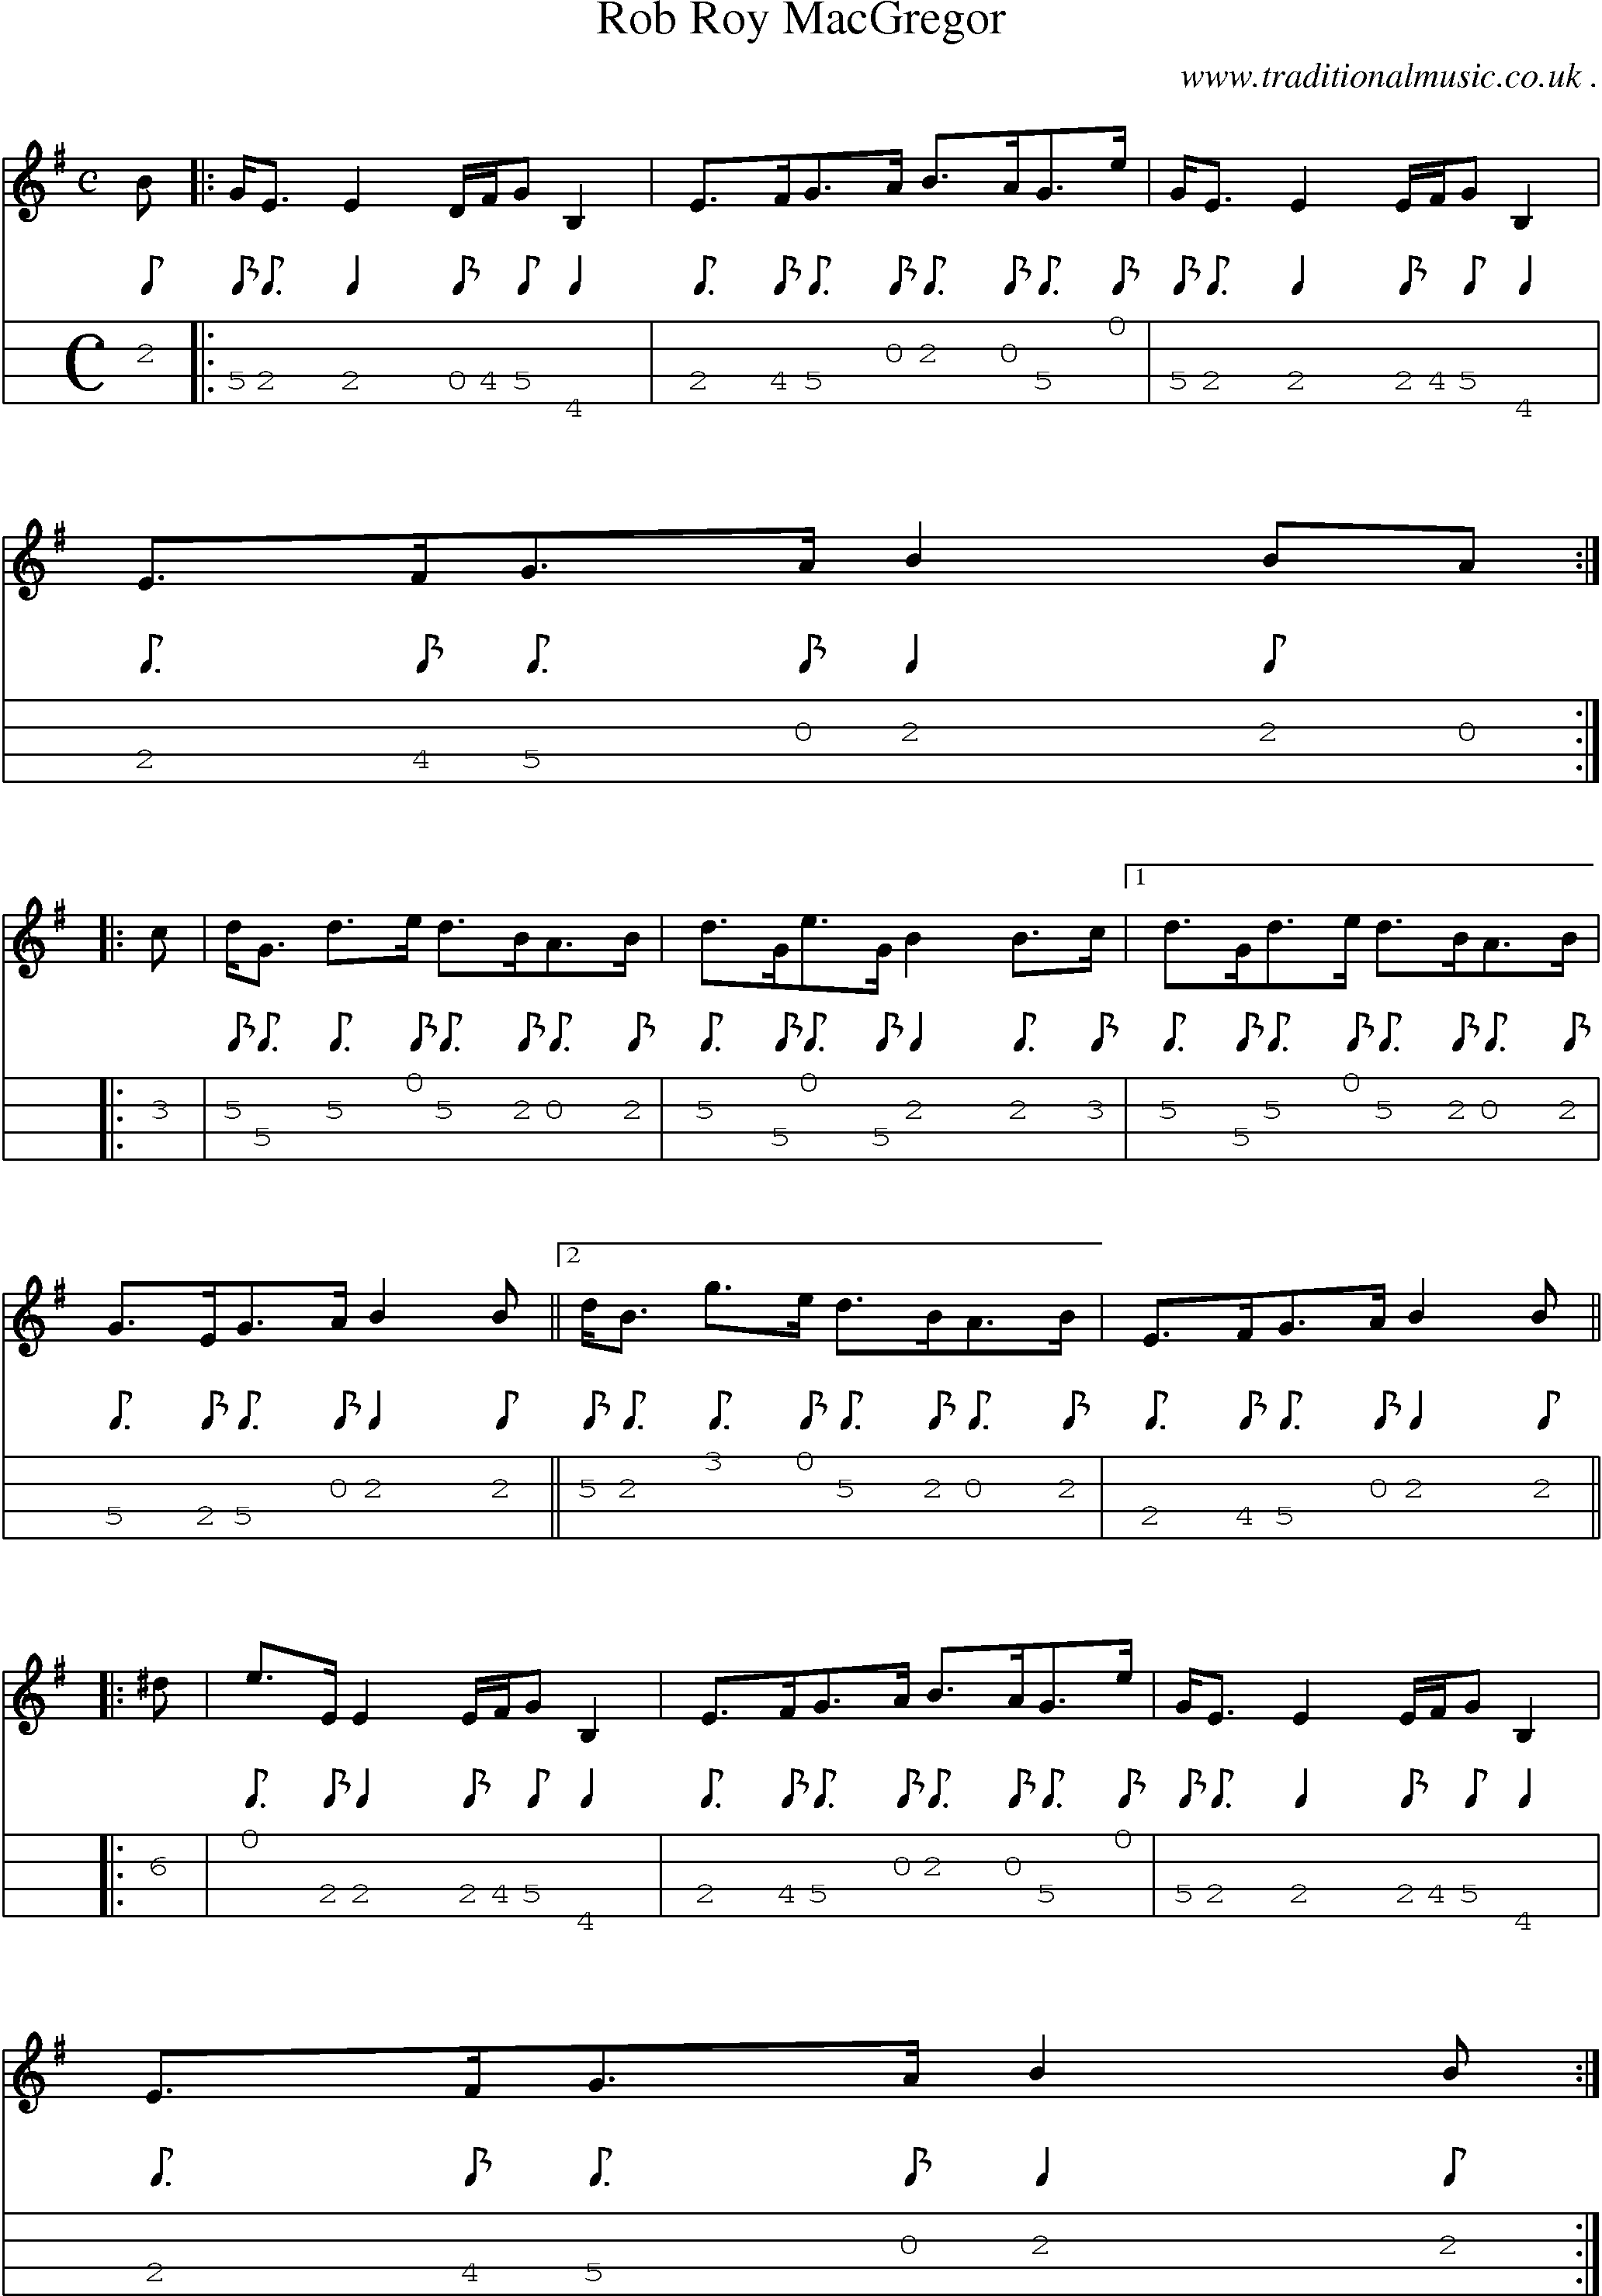 Sheet-music  score, Chords and Mandolin Tabs for Rob Roy Macgregor